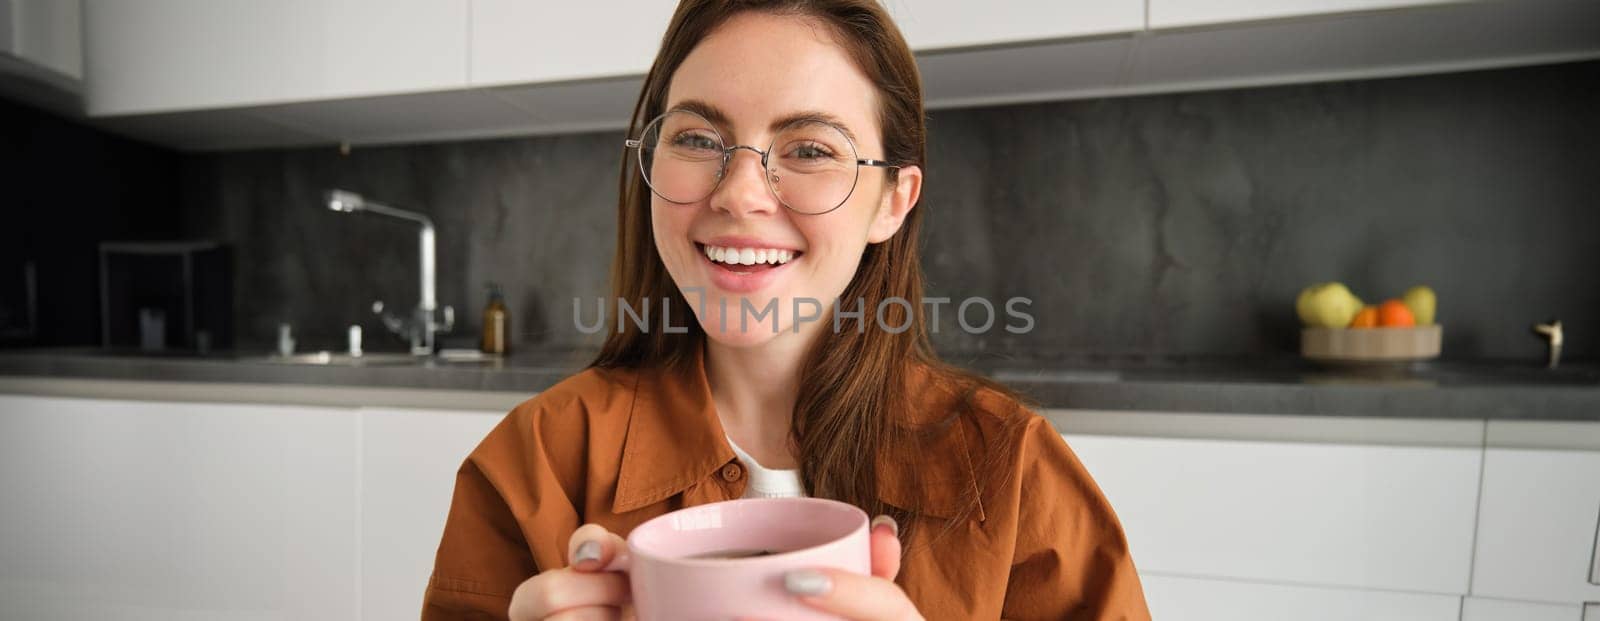 Close up portrait of beautiful brunette woman in glasses, resting, sitting in kitchen with cup of tea, holding mug, laughing and smiling.